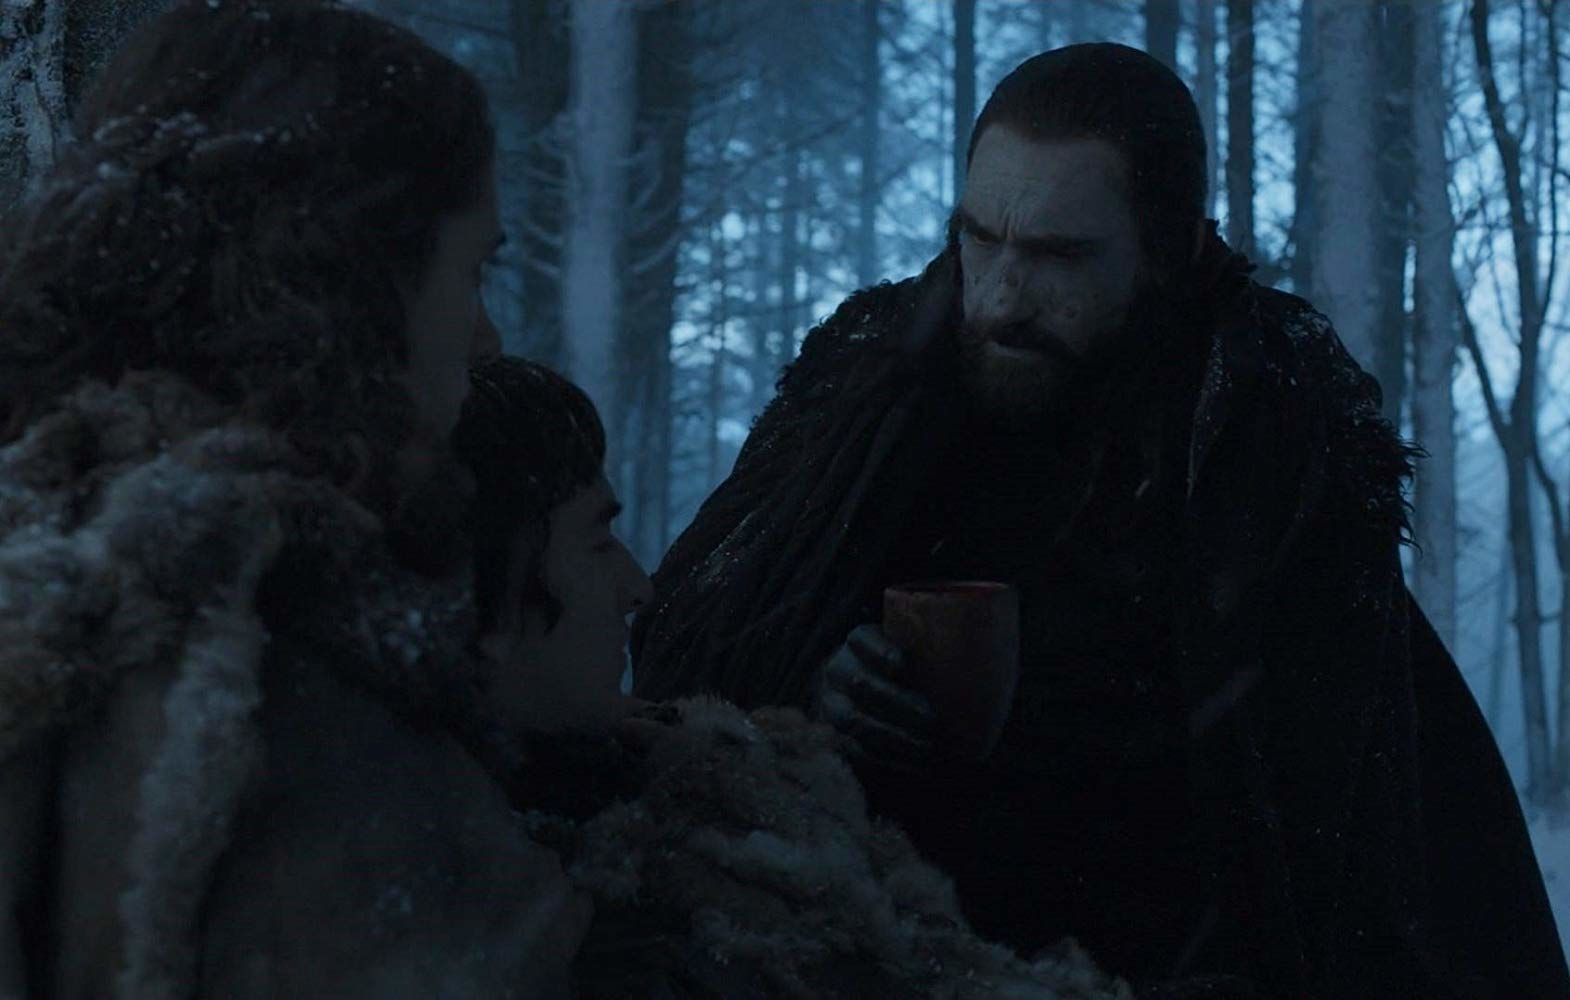 Joseph Mawle Game of Thrones Coldhands